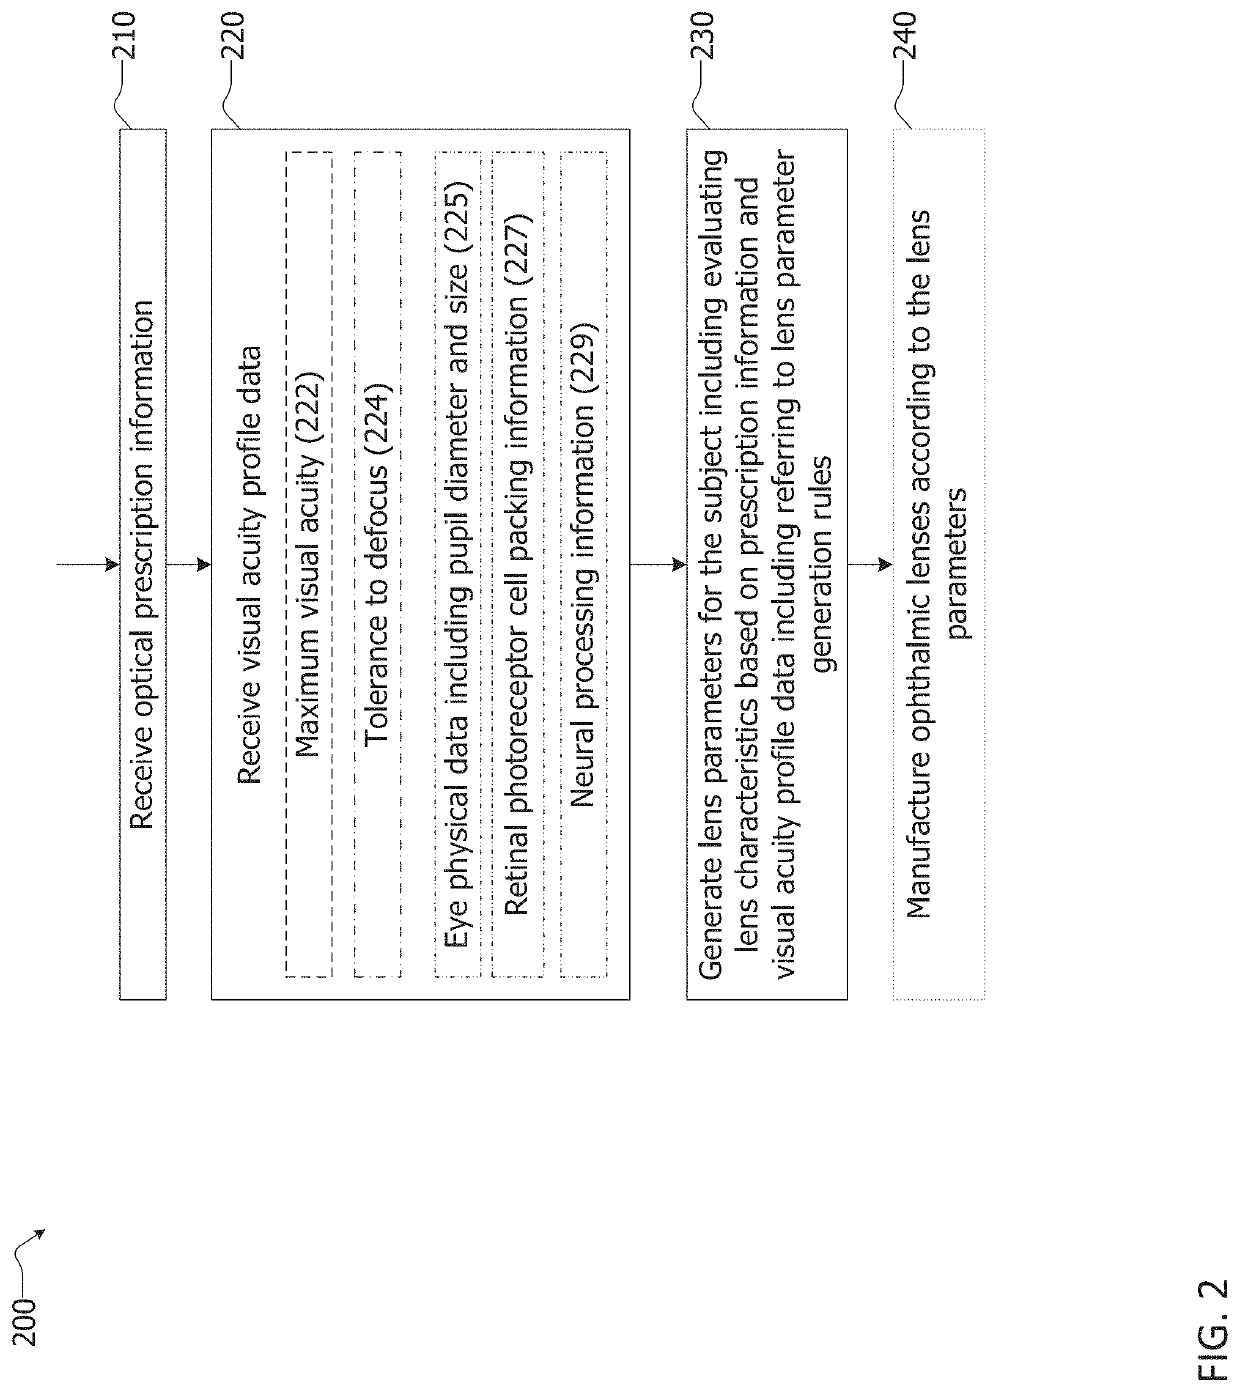 Ophthalmic lens design incorporating a visual acuity profile